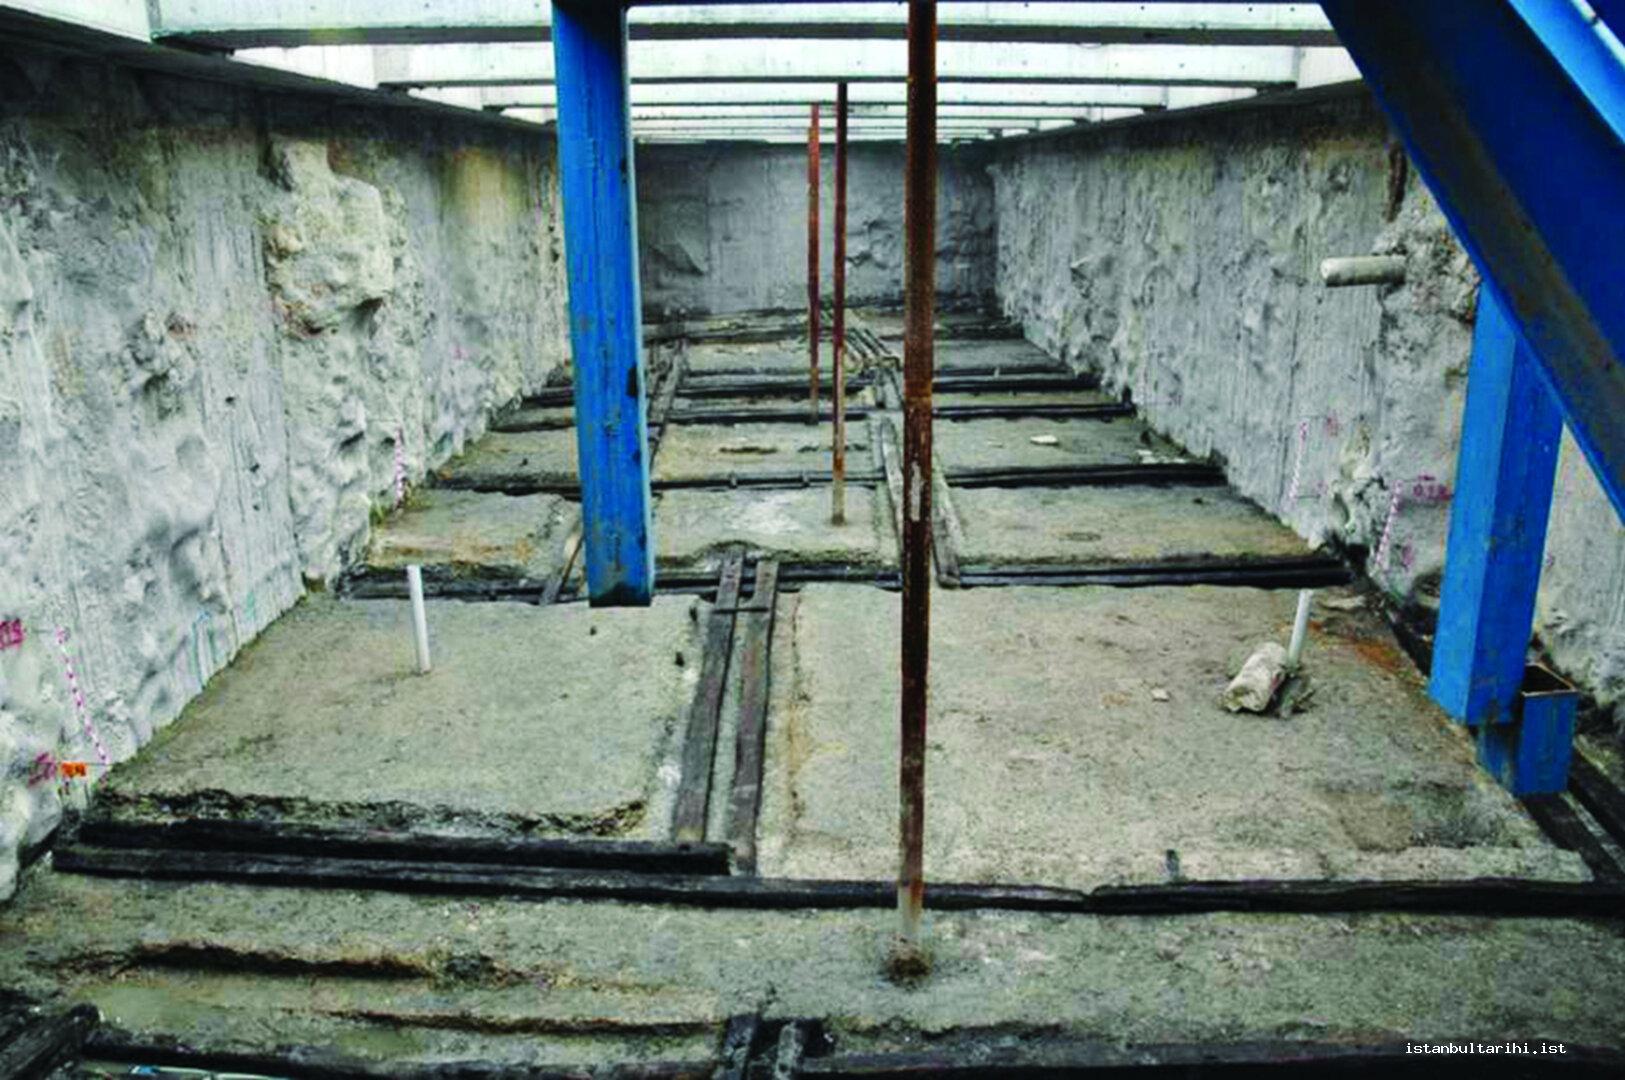 52- North entrance excavation area, Byzantium period wooden wall posts